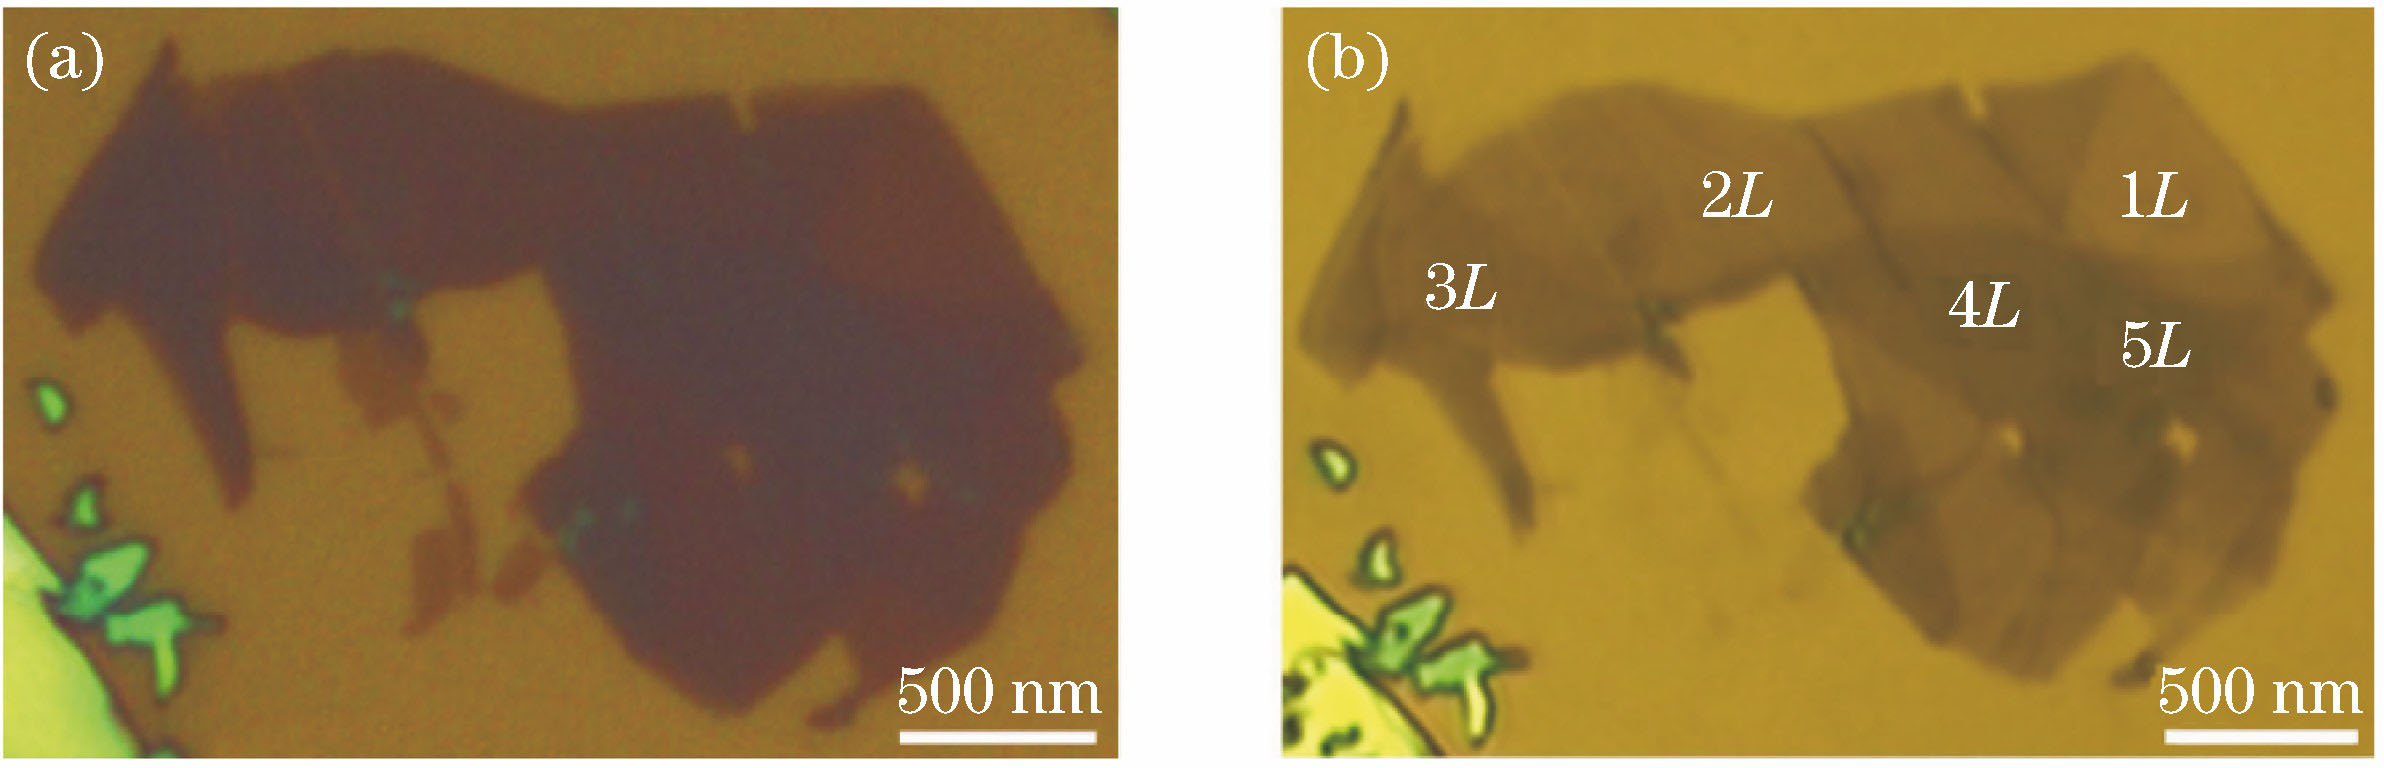 Optical images of black phosphorus before and after Ar+ plasma etching. (a) Before etching; (b) after etching